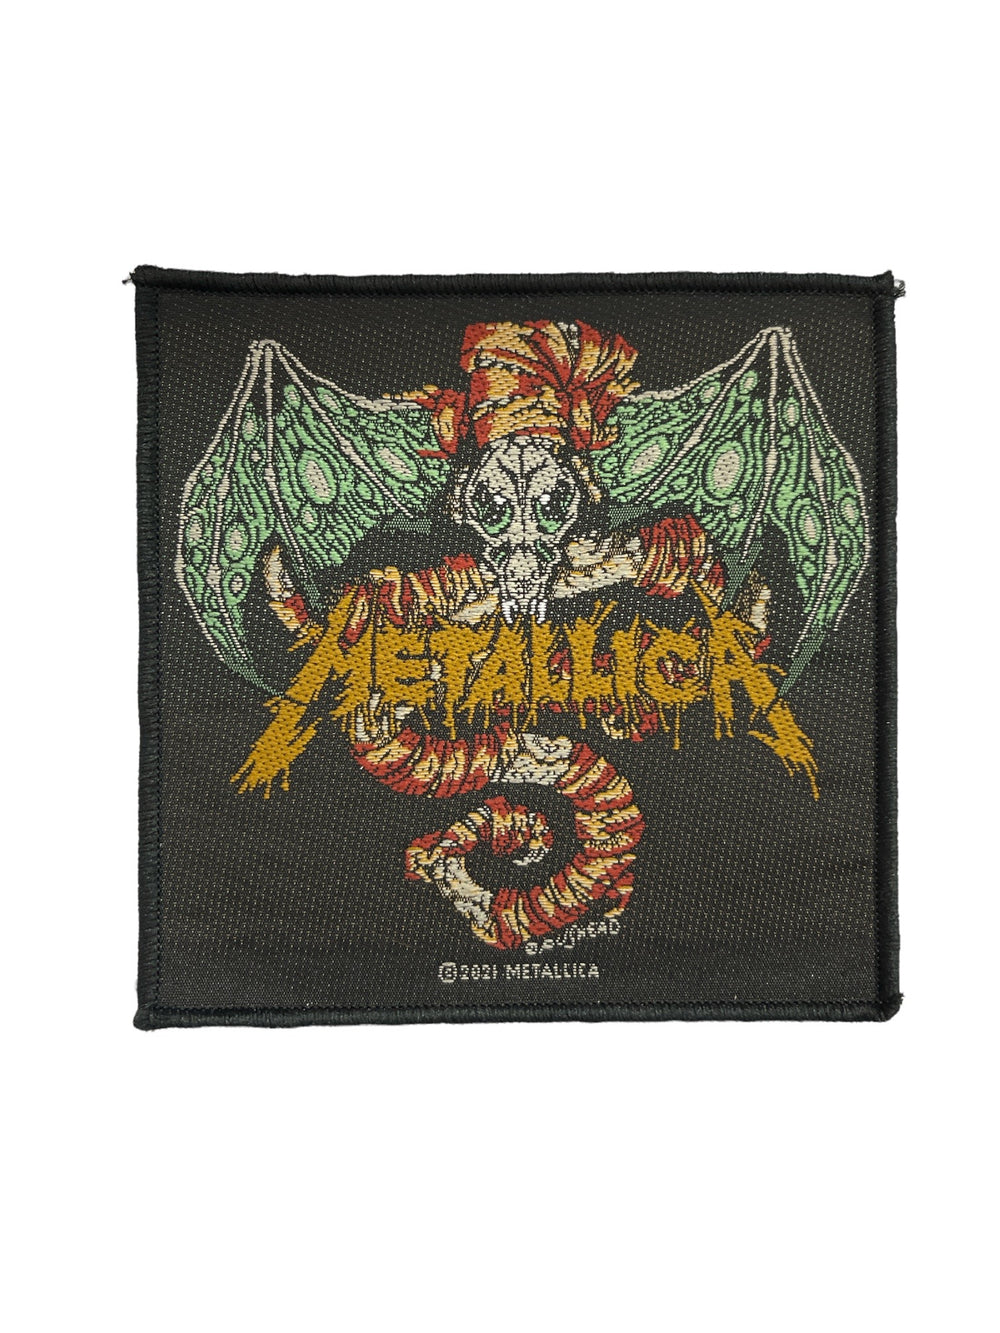 Metallica Wherever I May Roam SQUARE Official Woven Patch Brand New